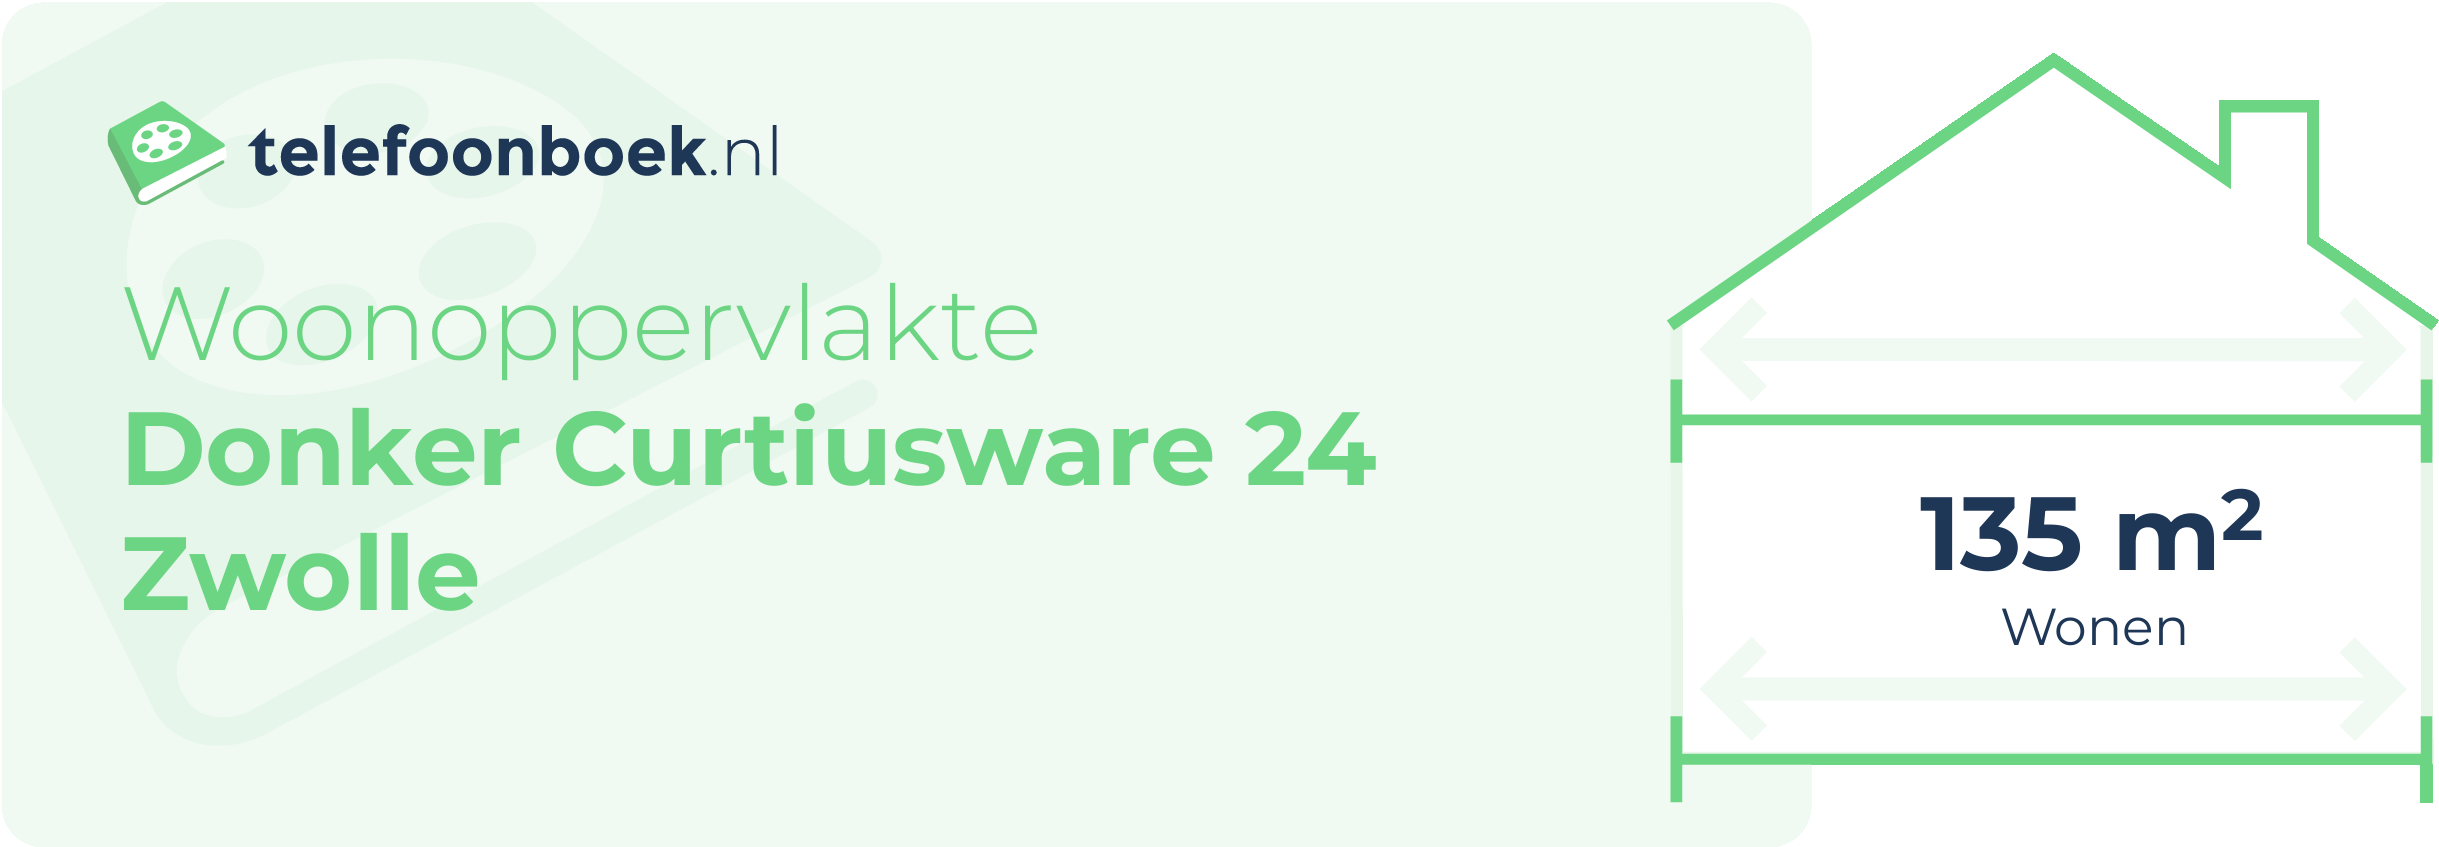 Woonoppervlakte Donker Curtiusware 24 Zwolle